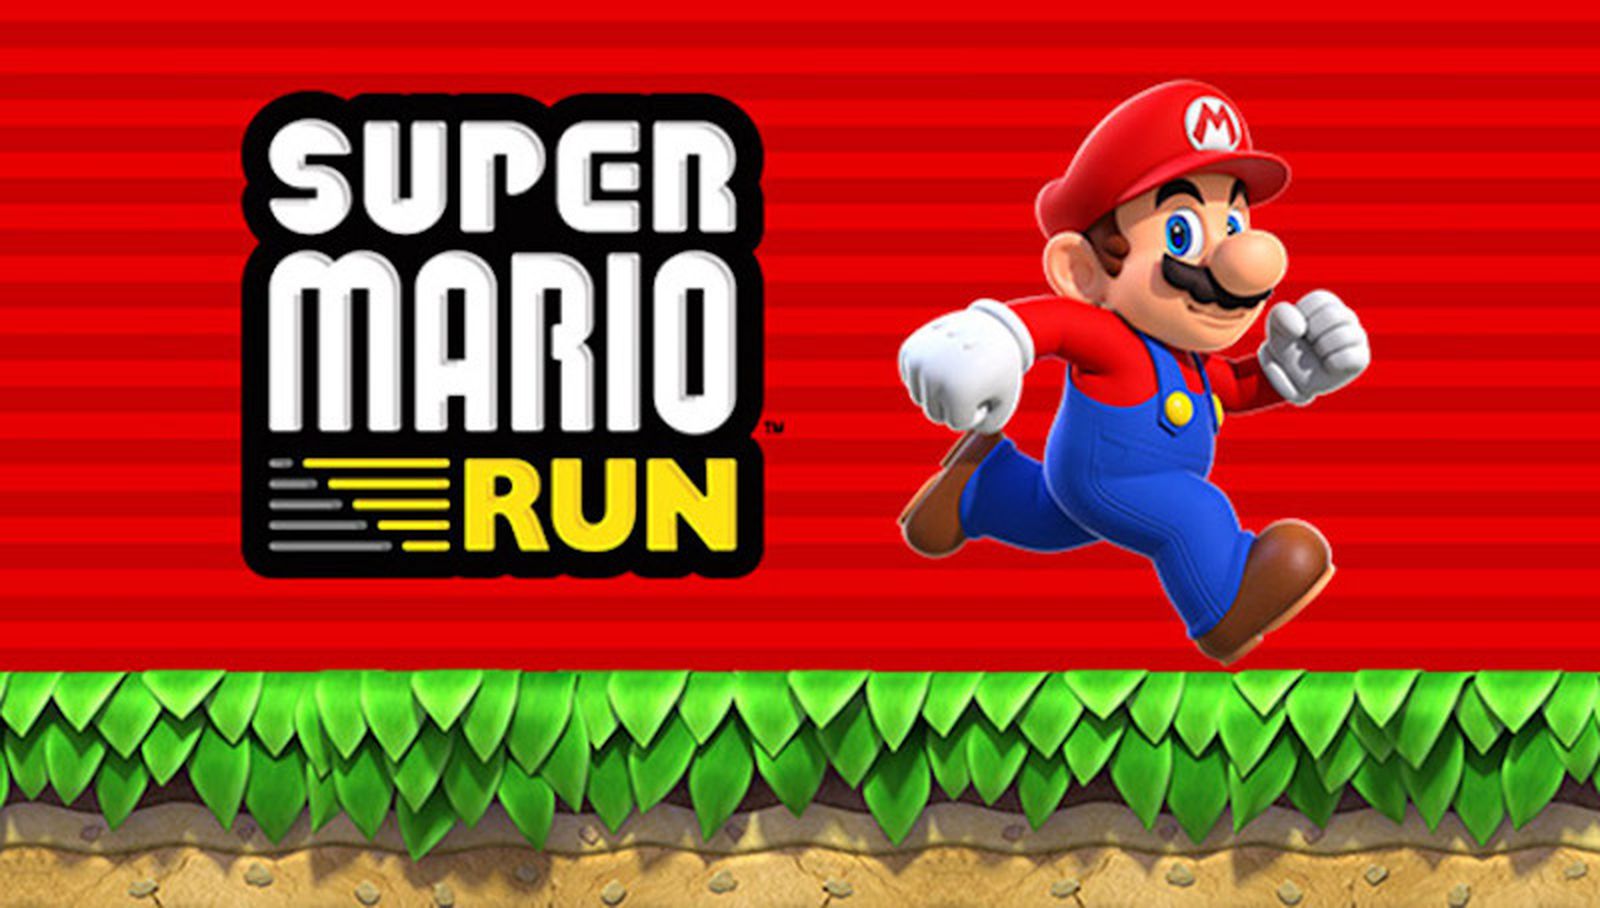 Super Mario Run Requires Always-On Internet Connection to Play Due